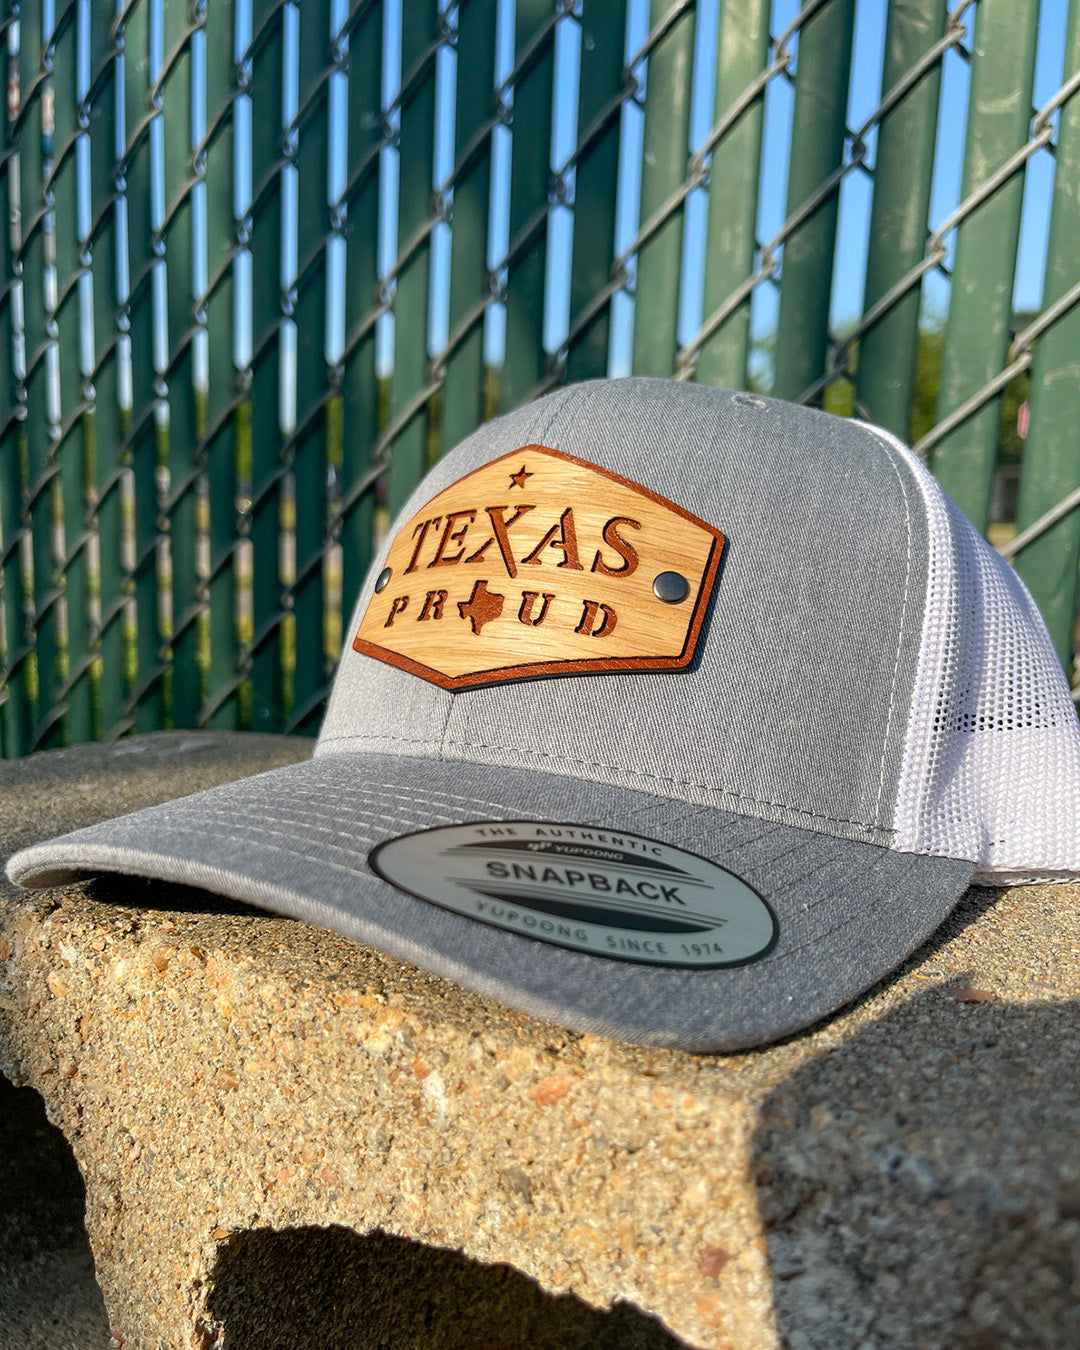 Cheap Custom Leather Patches for Hats Original Texas Proud Edition Real Wood & Leather Patch Hat Retro Trucker Mesh Cap